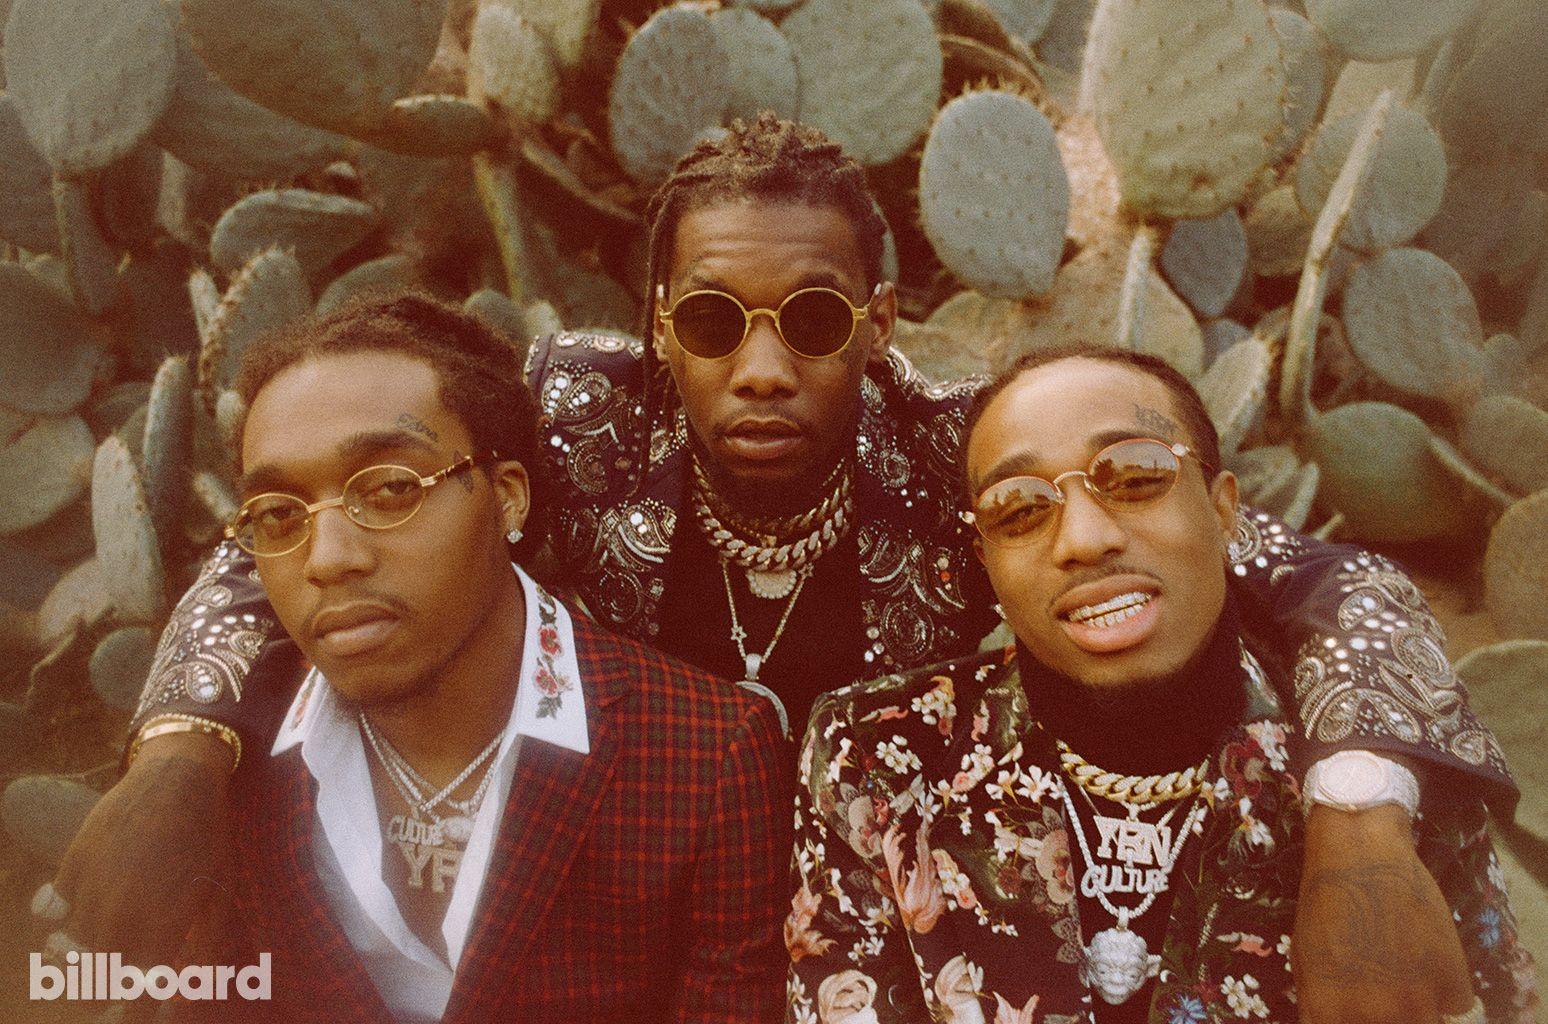 Migos: Photo From The Billboard Cover Shoot